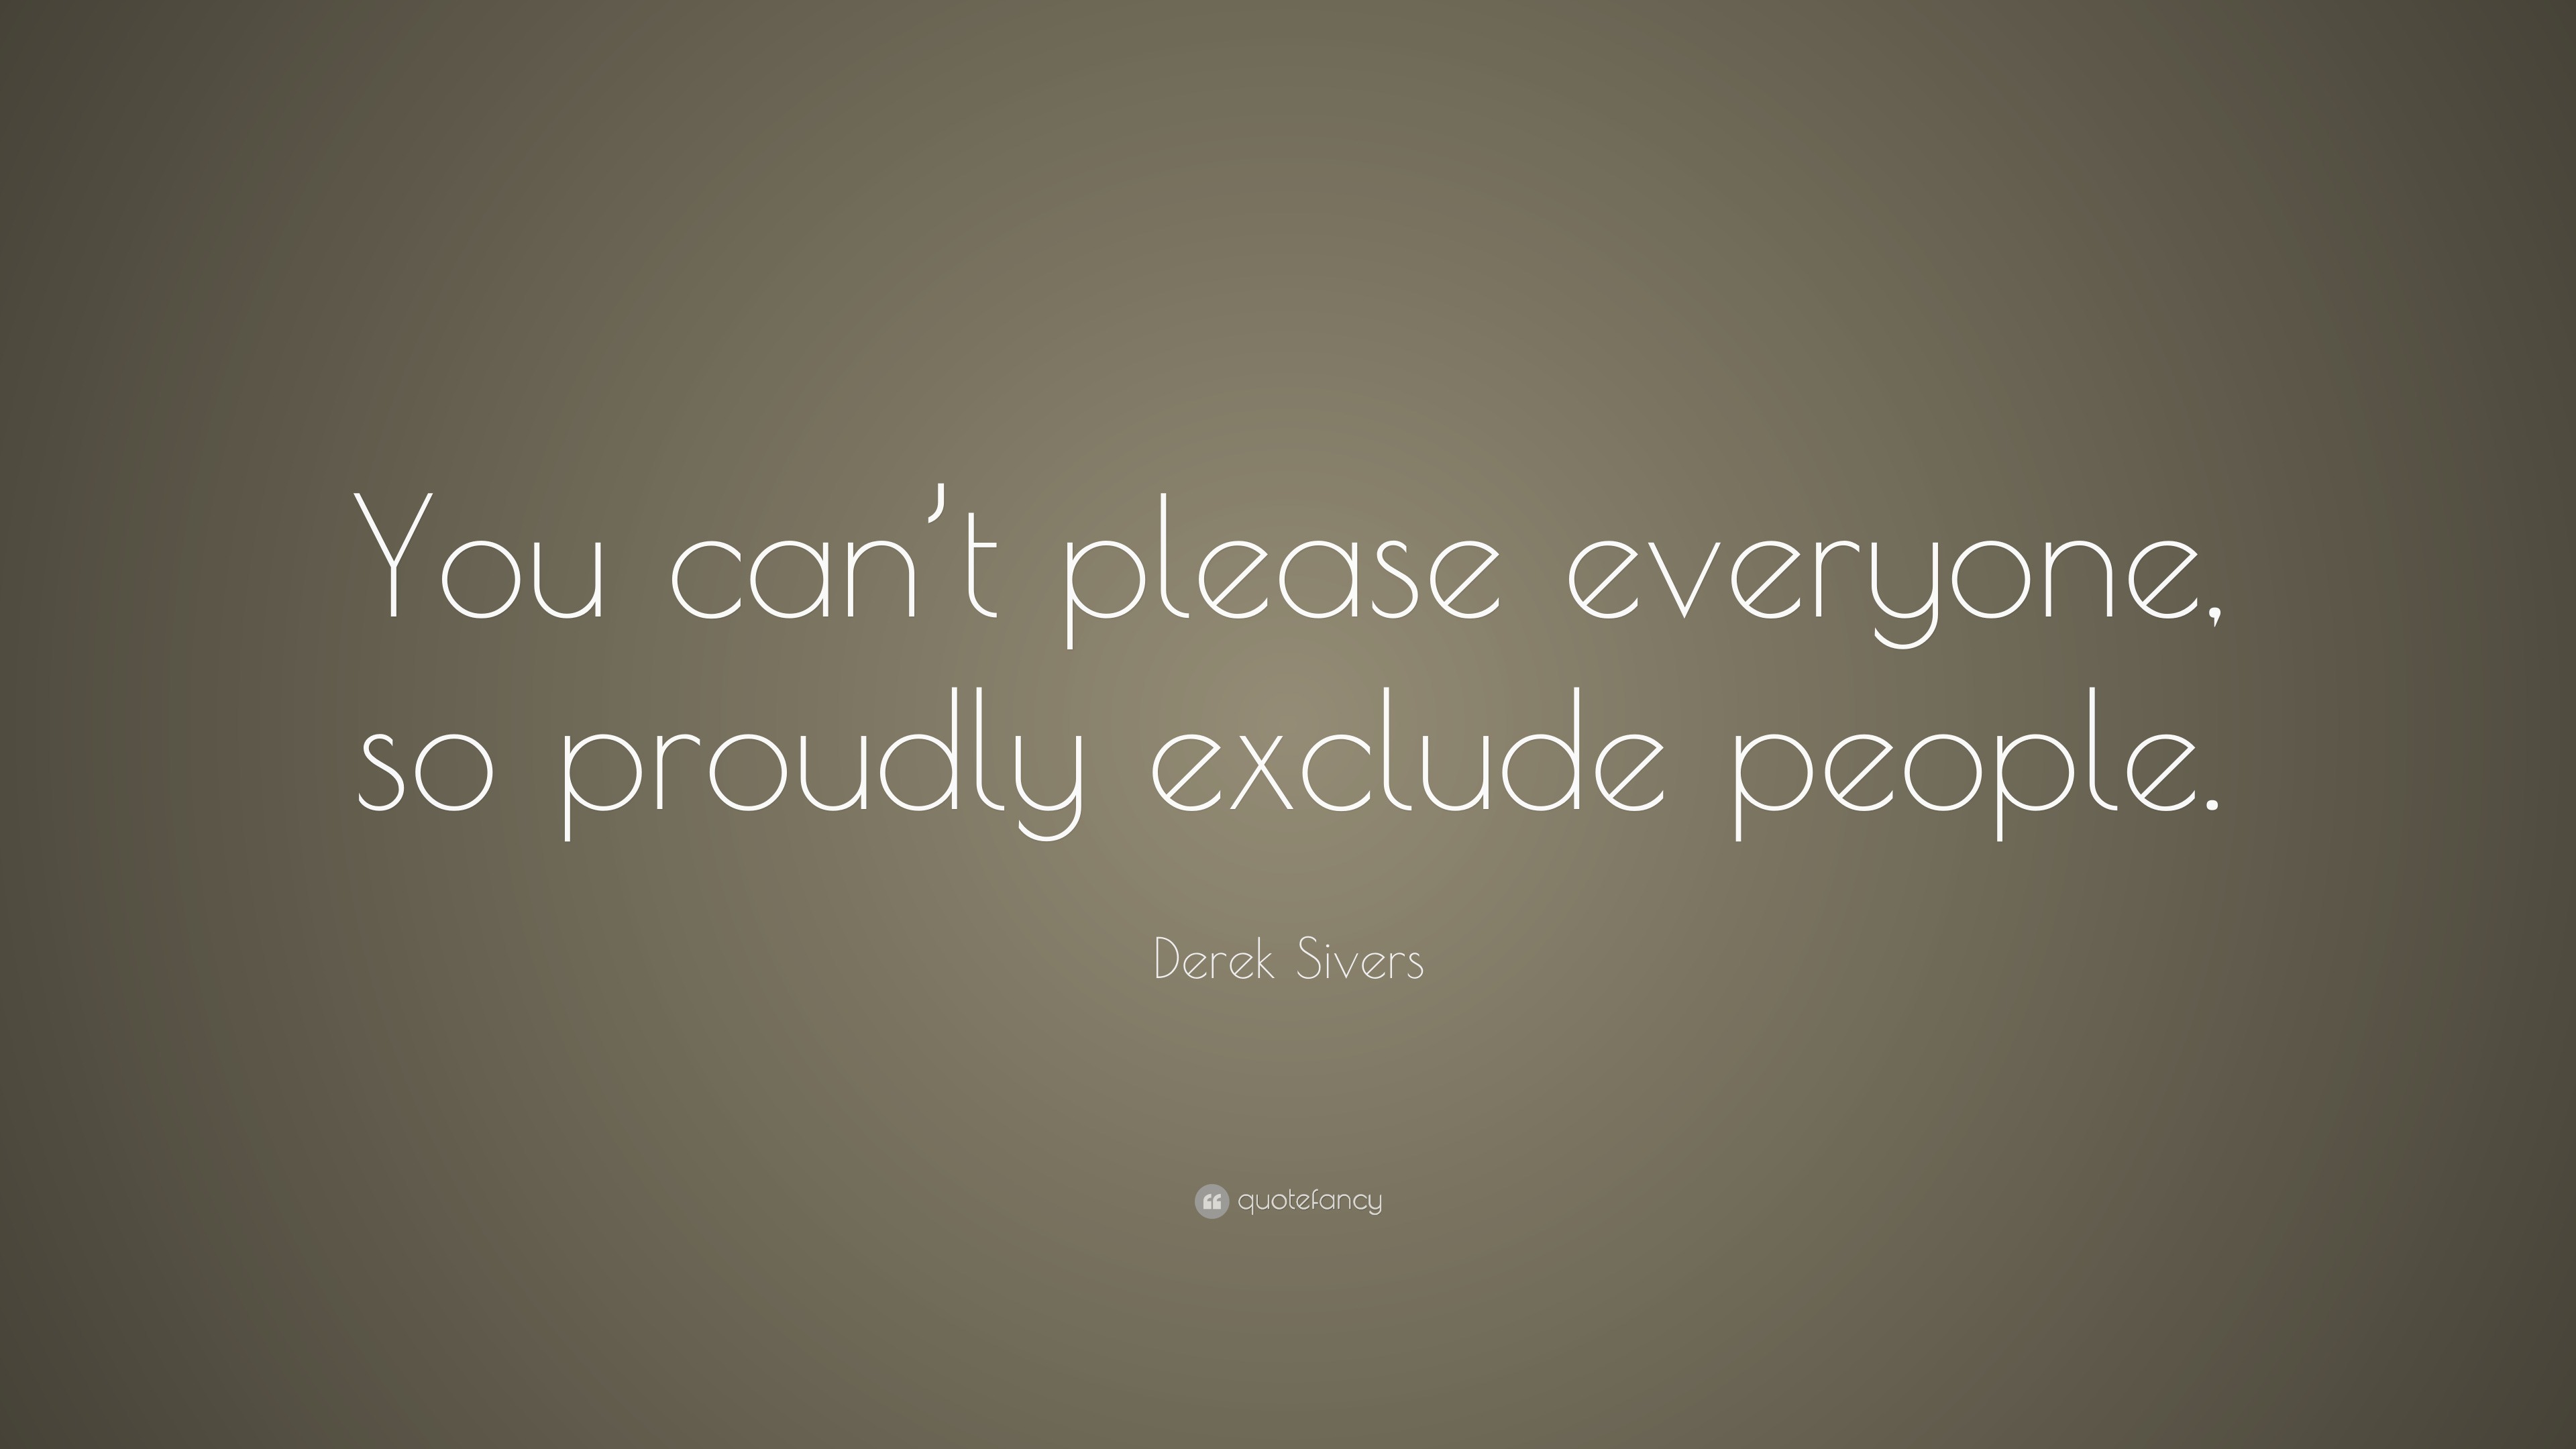 https://quotefancy.com/media/wallpaper/3840x2160/4862021-Derek-Sivers-Quote-You-can-t-please-everyone-so-proudly-exclude.jpg